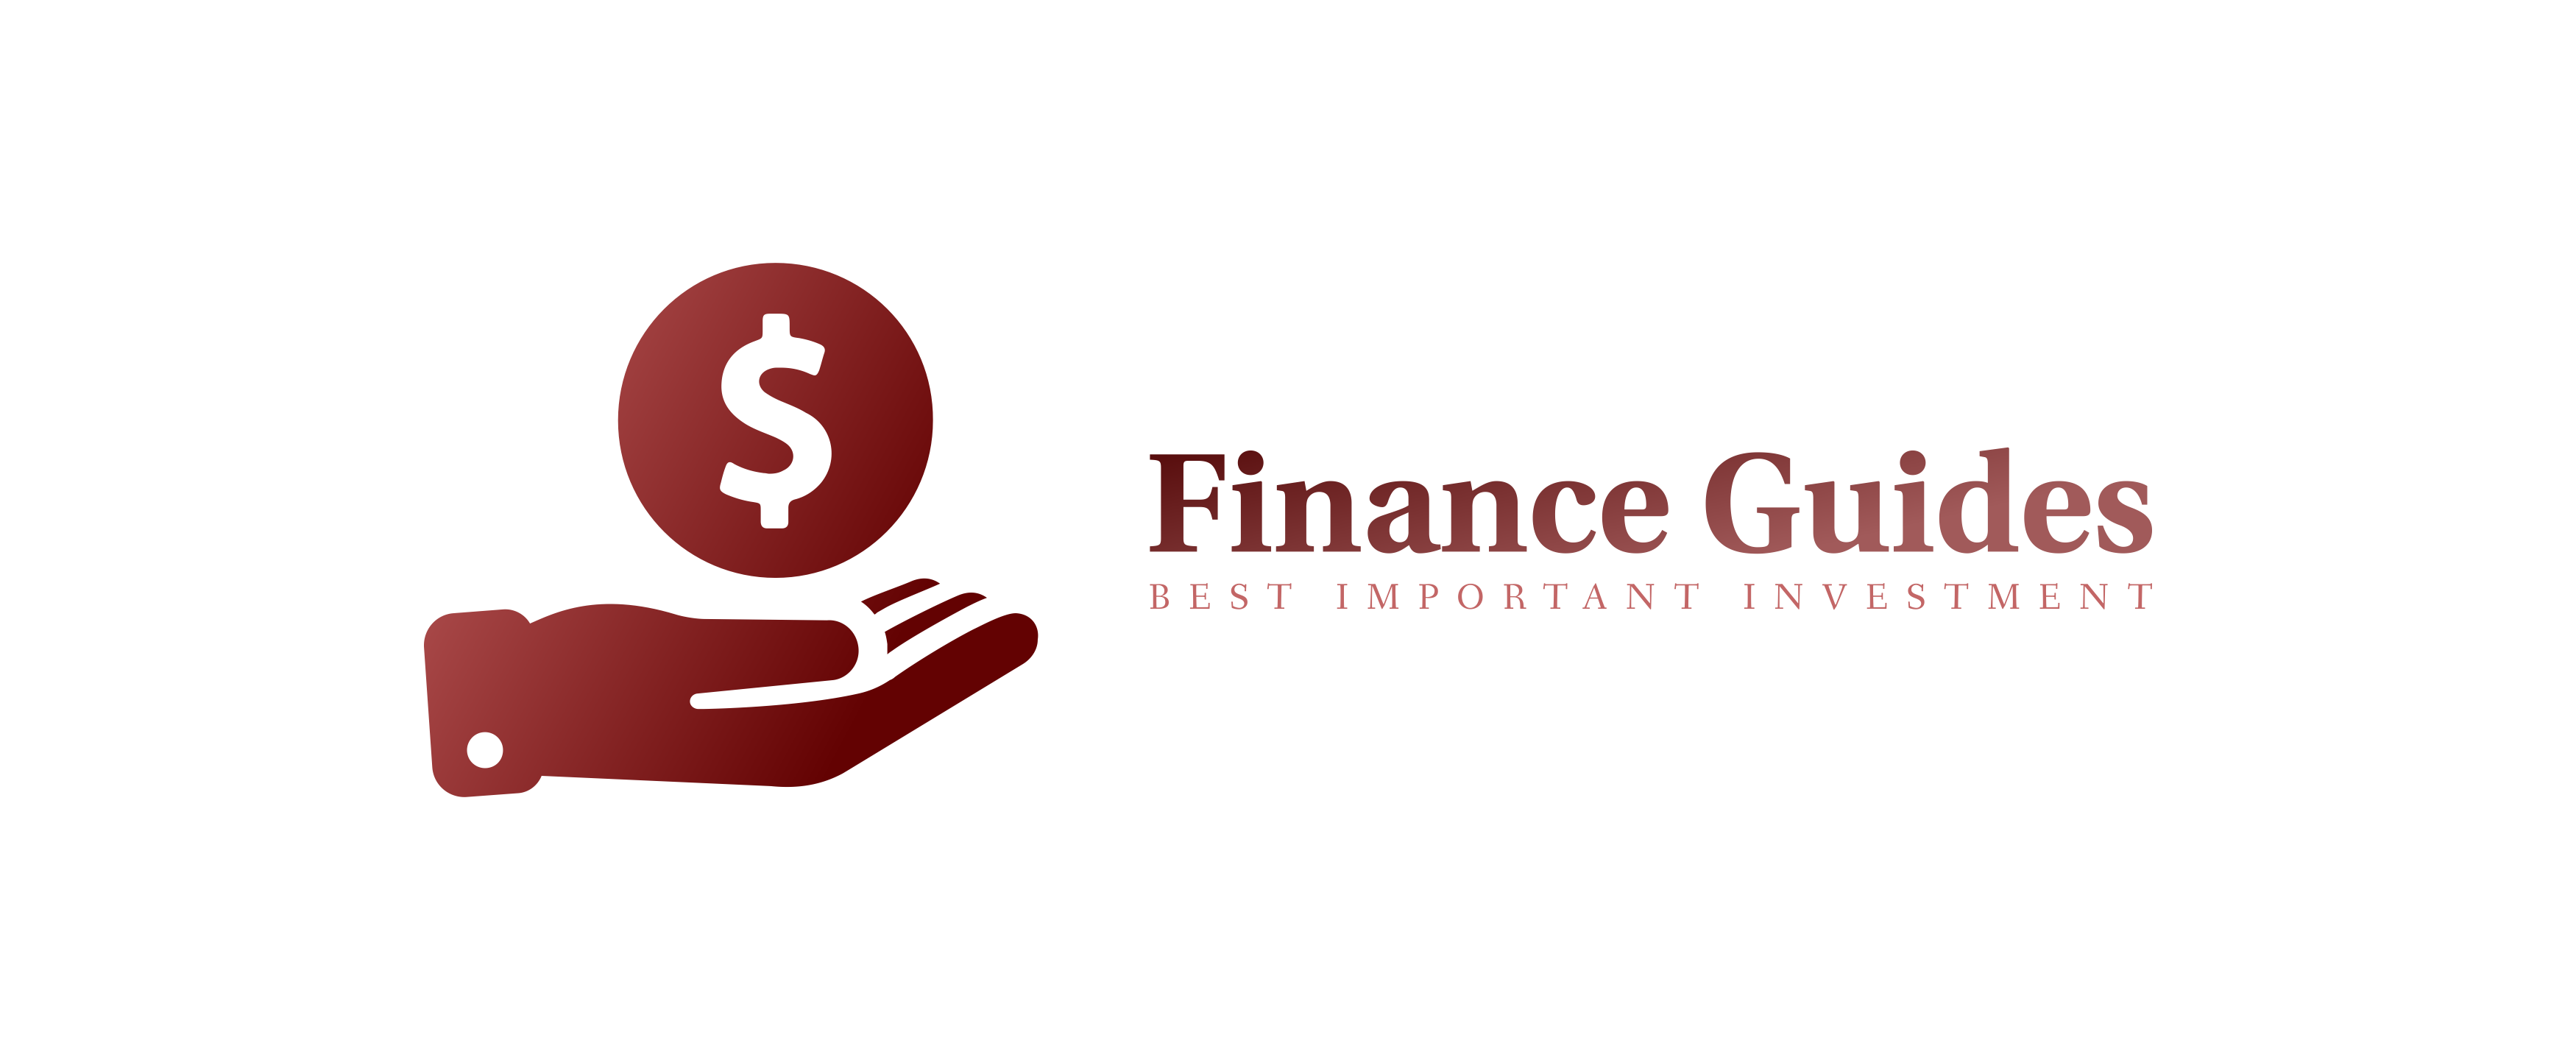 Finance Guides